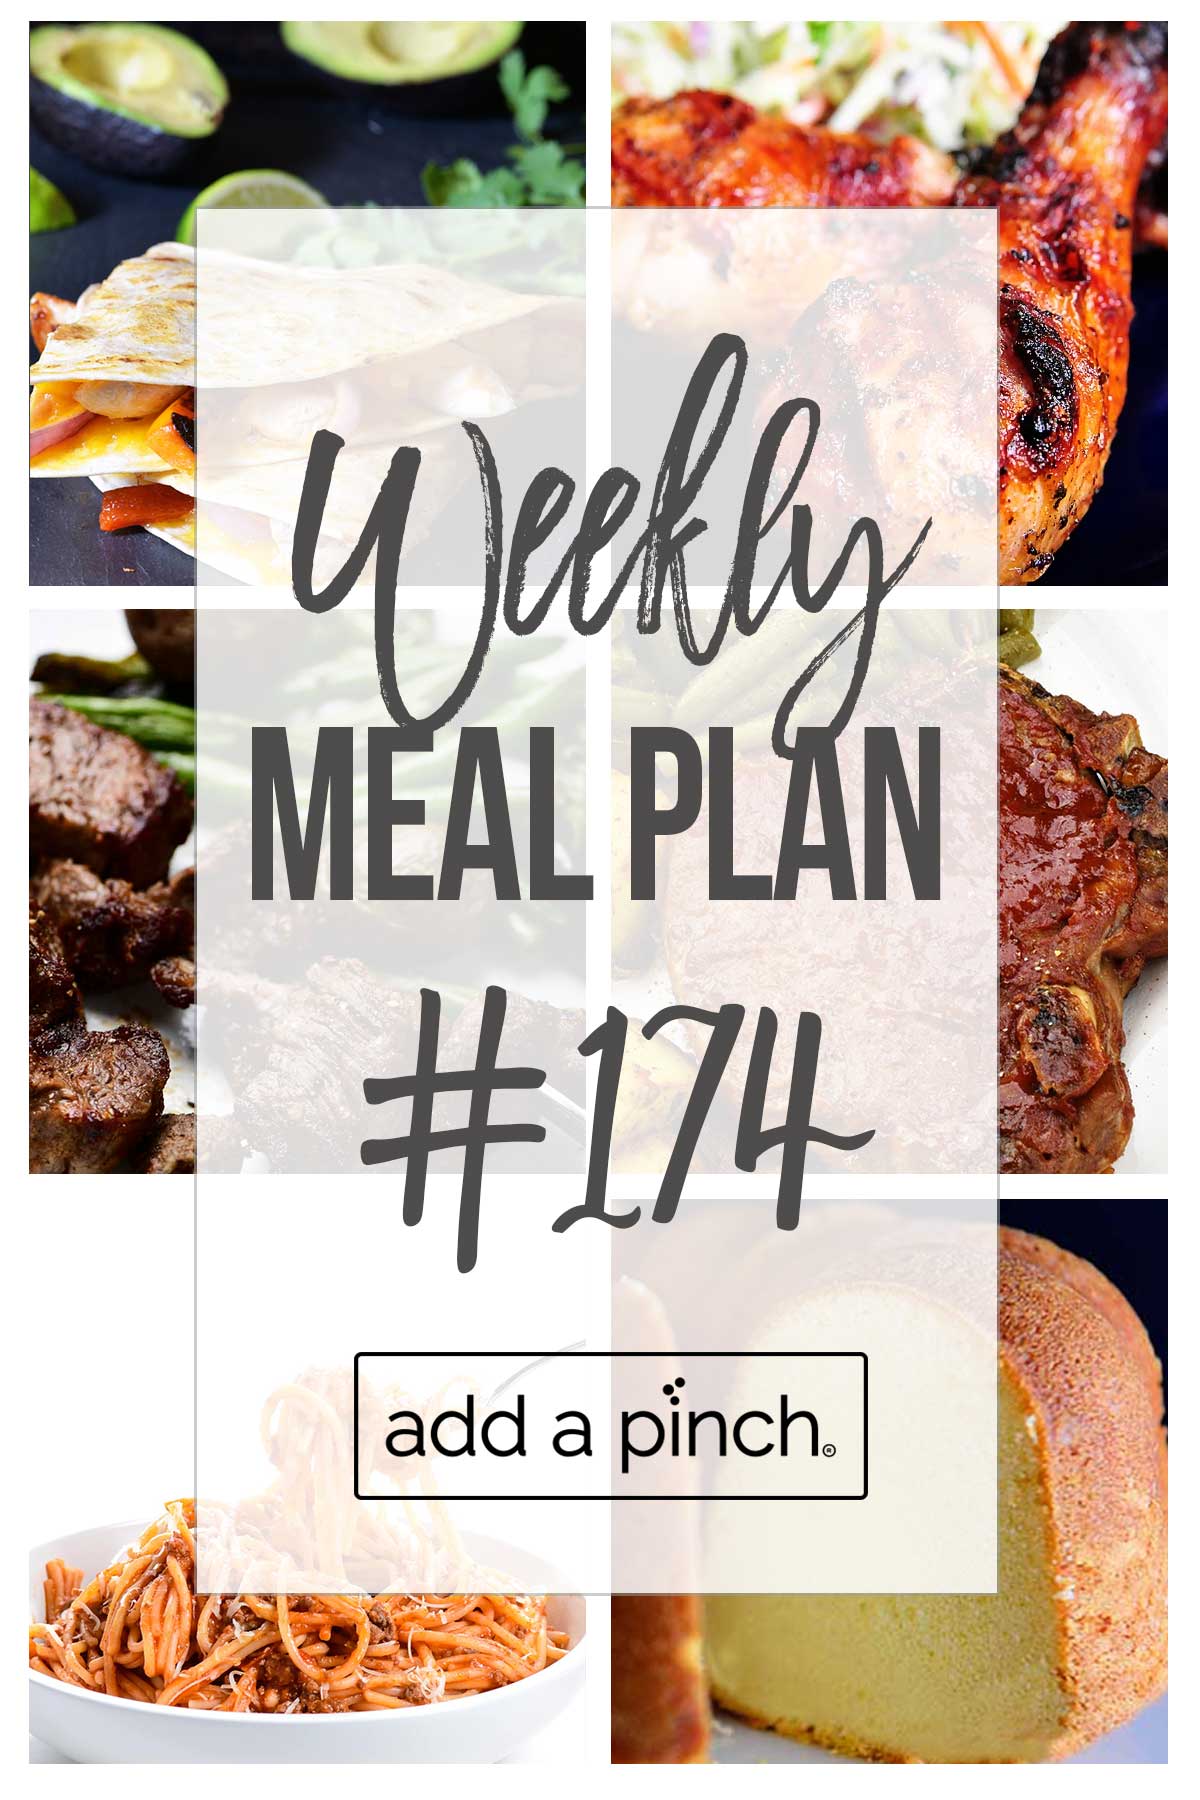 Collage of images for meals in weekly meal plan #174 with text overlay that says "weekly meal plan #174" and includes the addapinch.com logo.